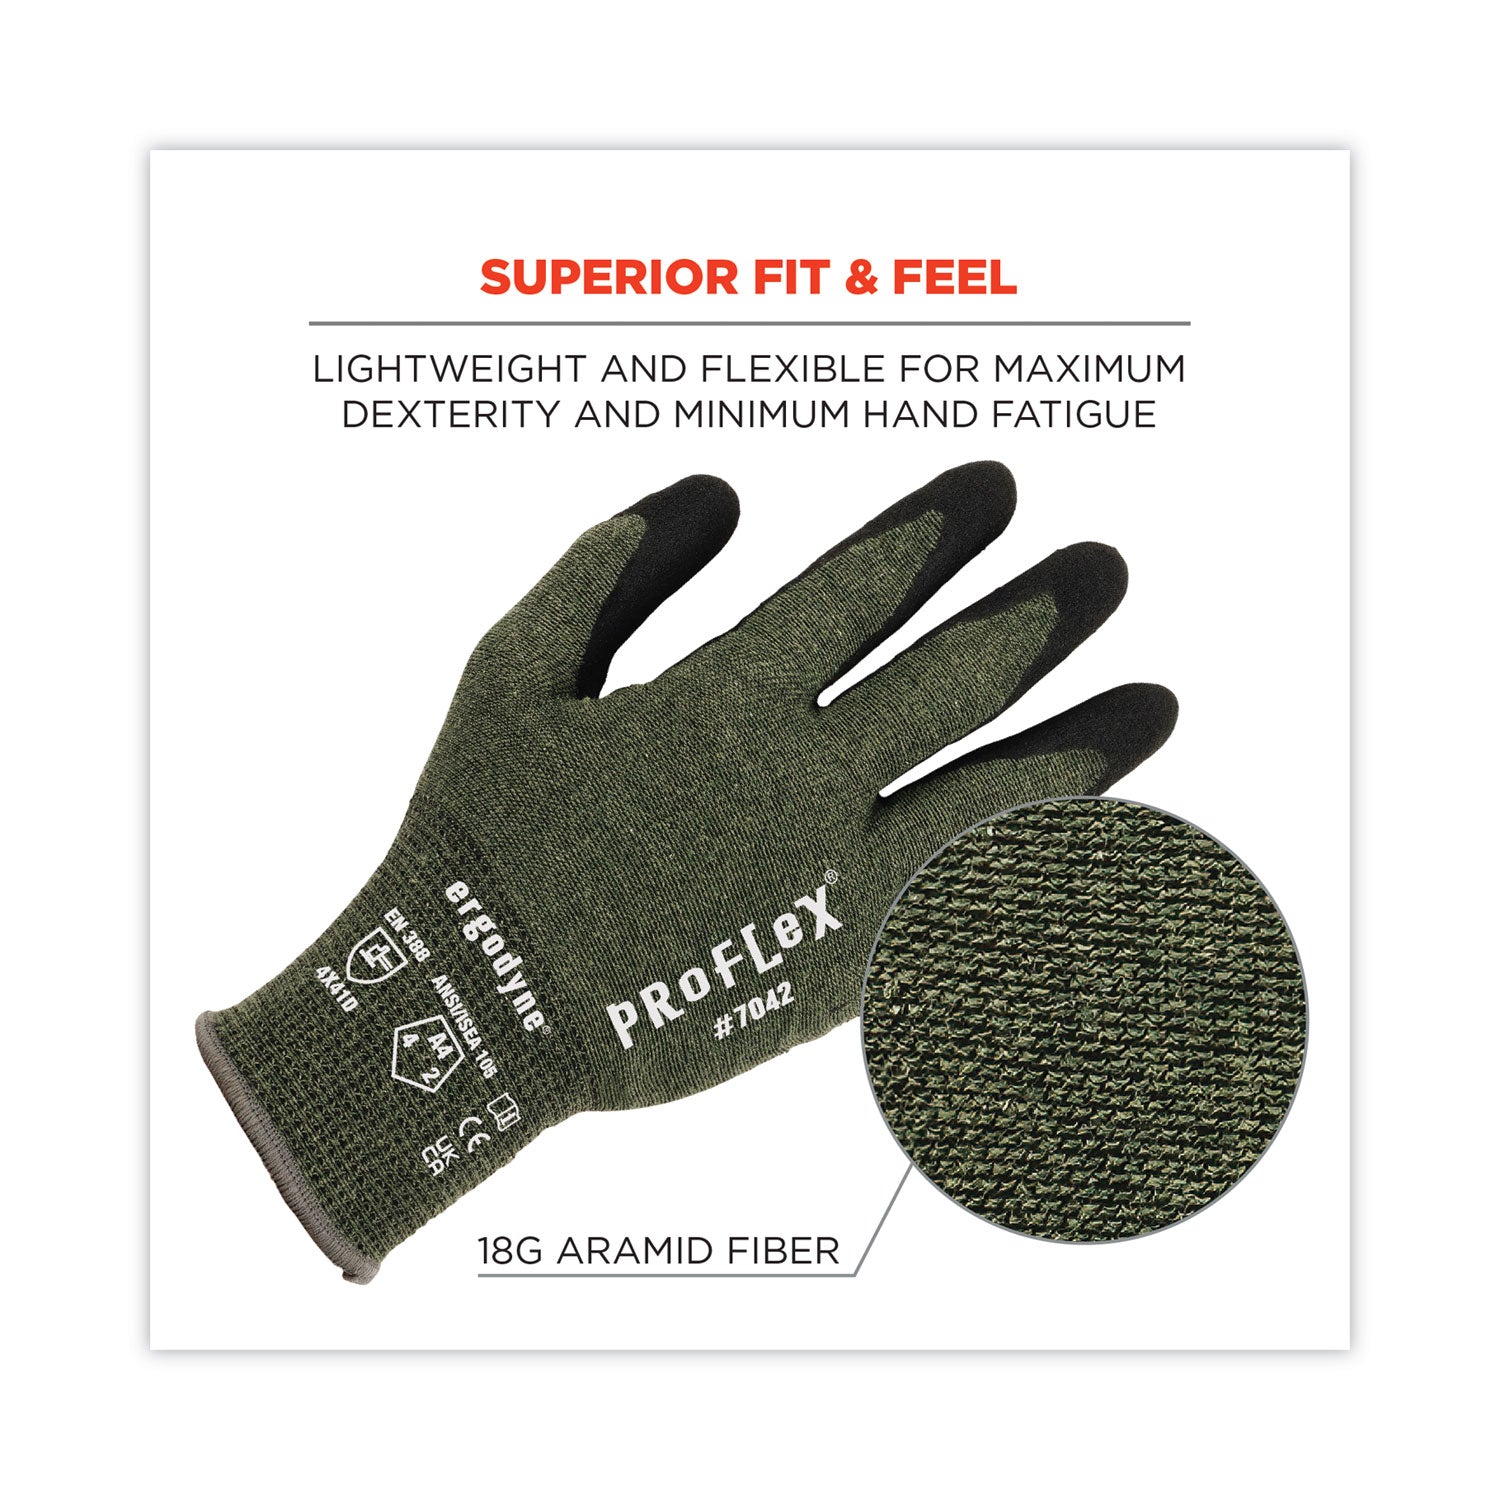 proflex-7042-ansi-a4-nitrile-coated-cr-gloves-green-medium-pair-ships-in-1-3-business-days_ego10343 - 3